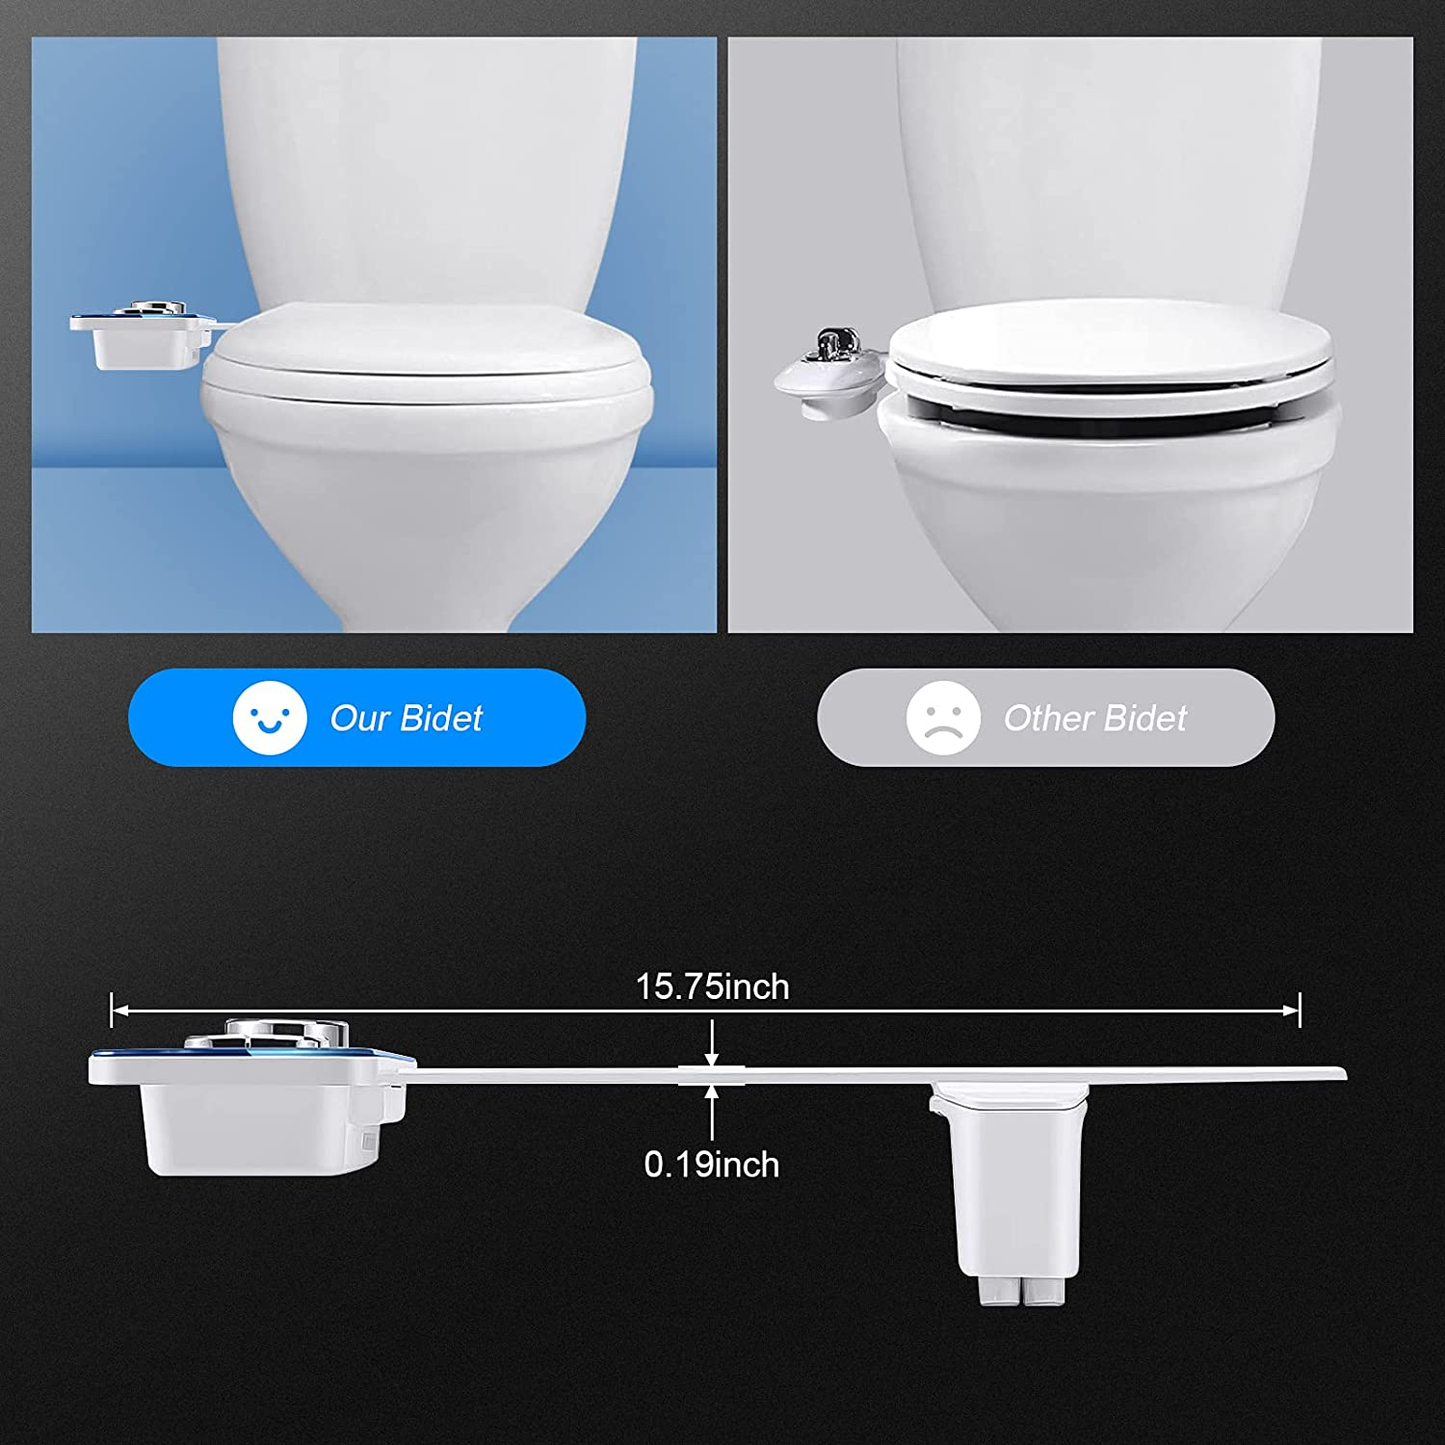 Bidet for Toilet Attachment Non-Electrical Self-Cleaning Nozzle Toilet Seat Attachment (Posterior/Feminine Wash), Bidet Sprayer with Stainless Steel Hose Baday Toilet Seat Attachment